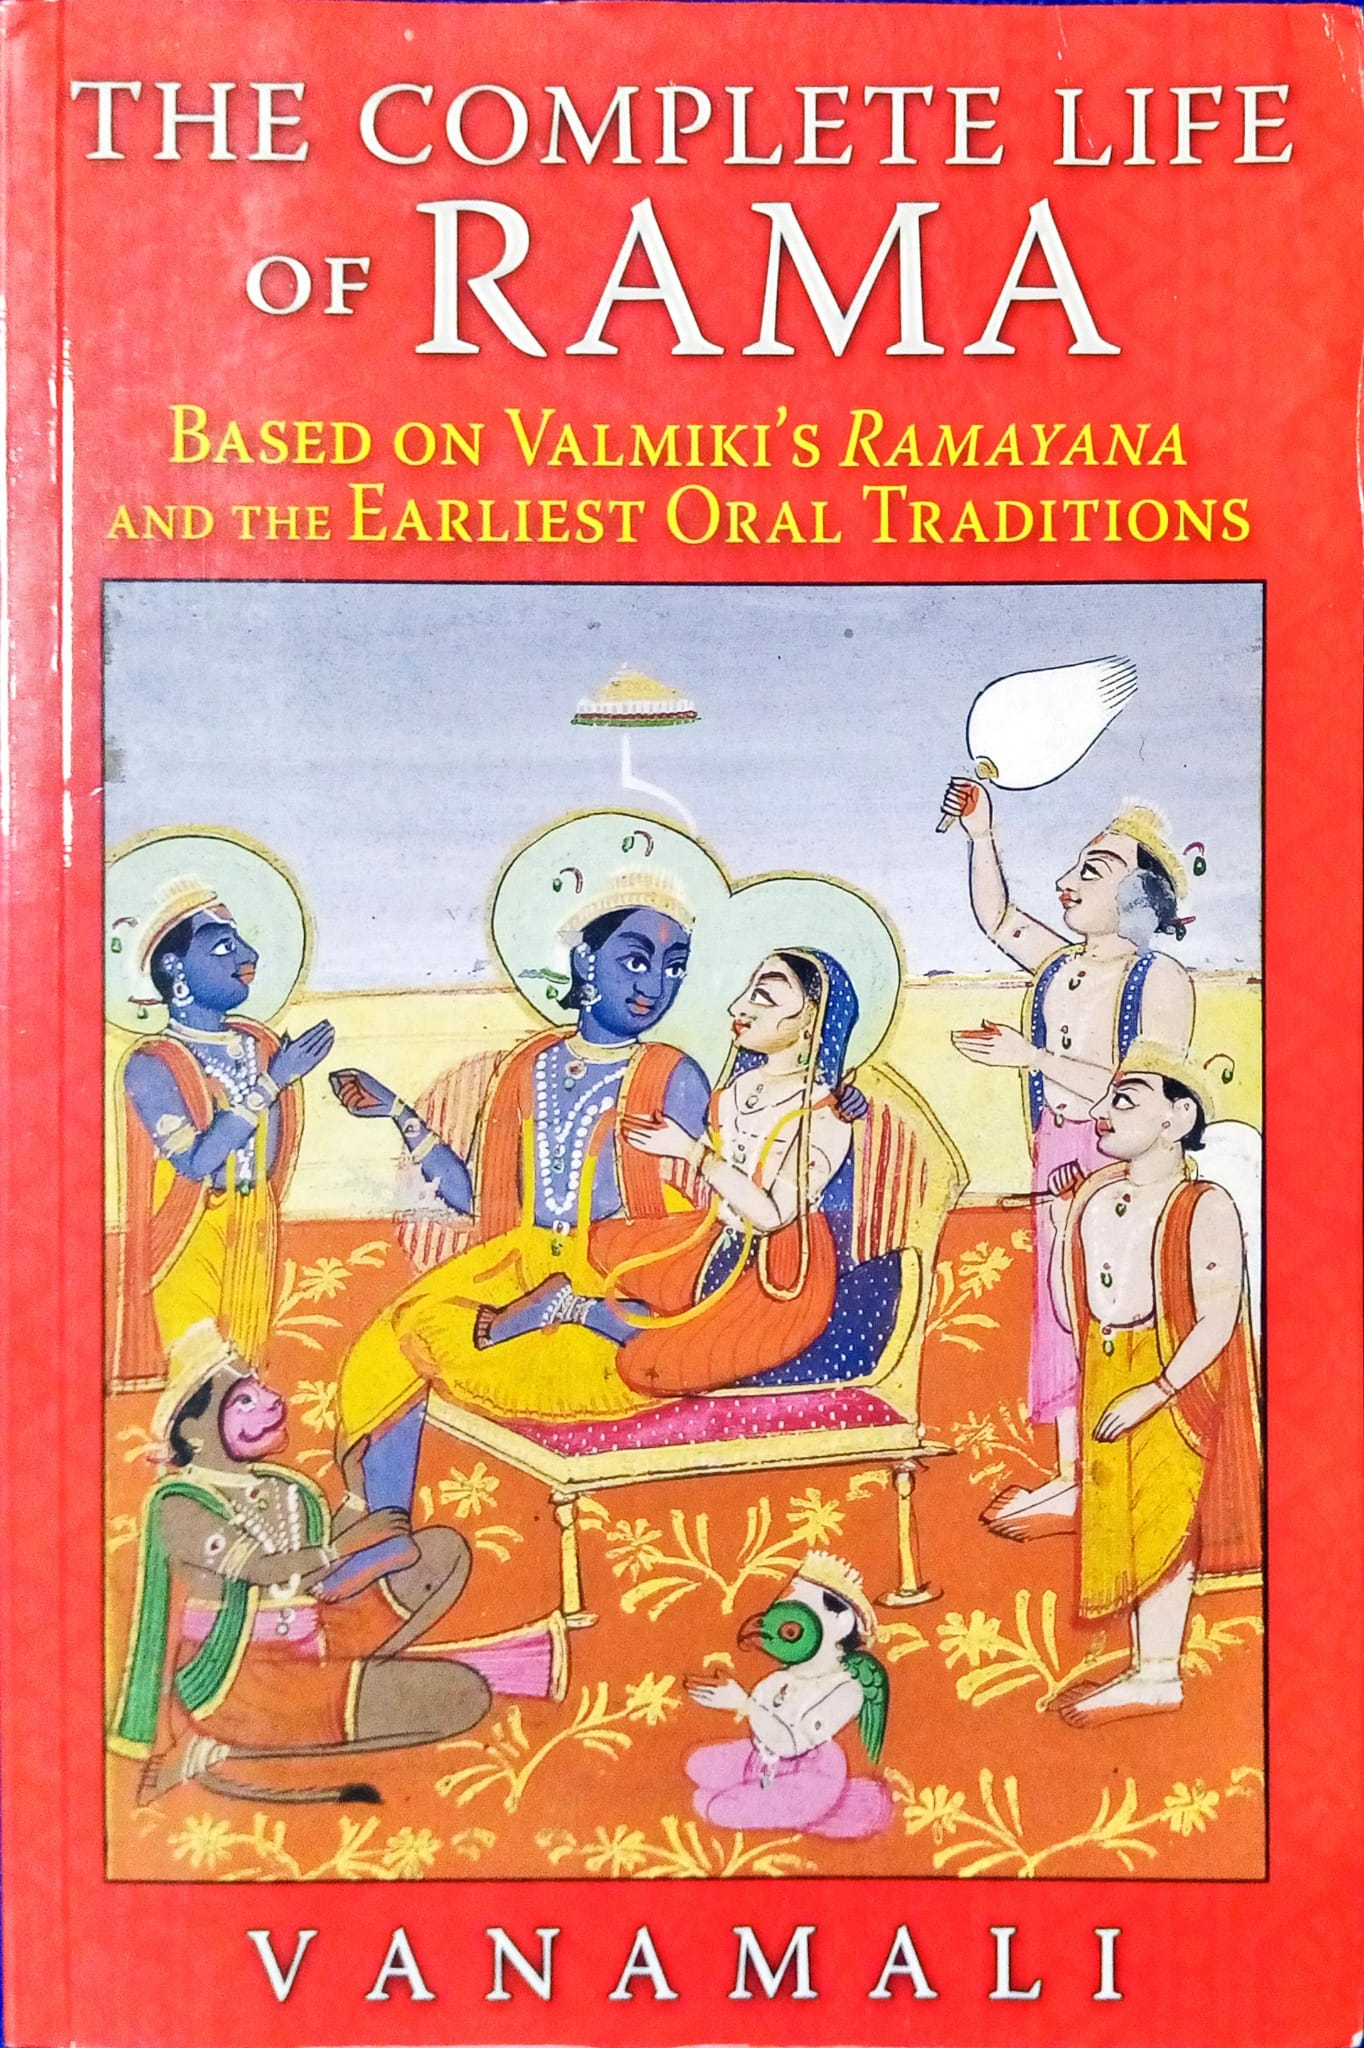 The Complete life of Rama